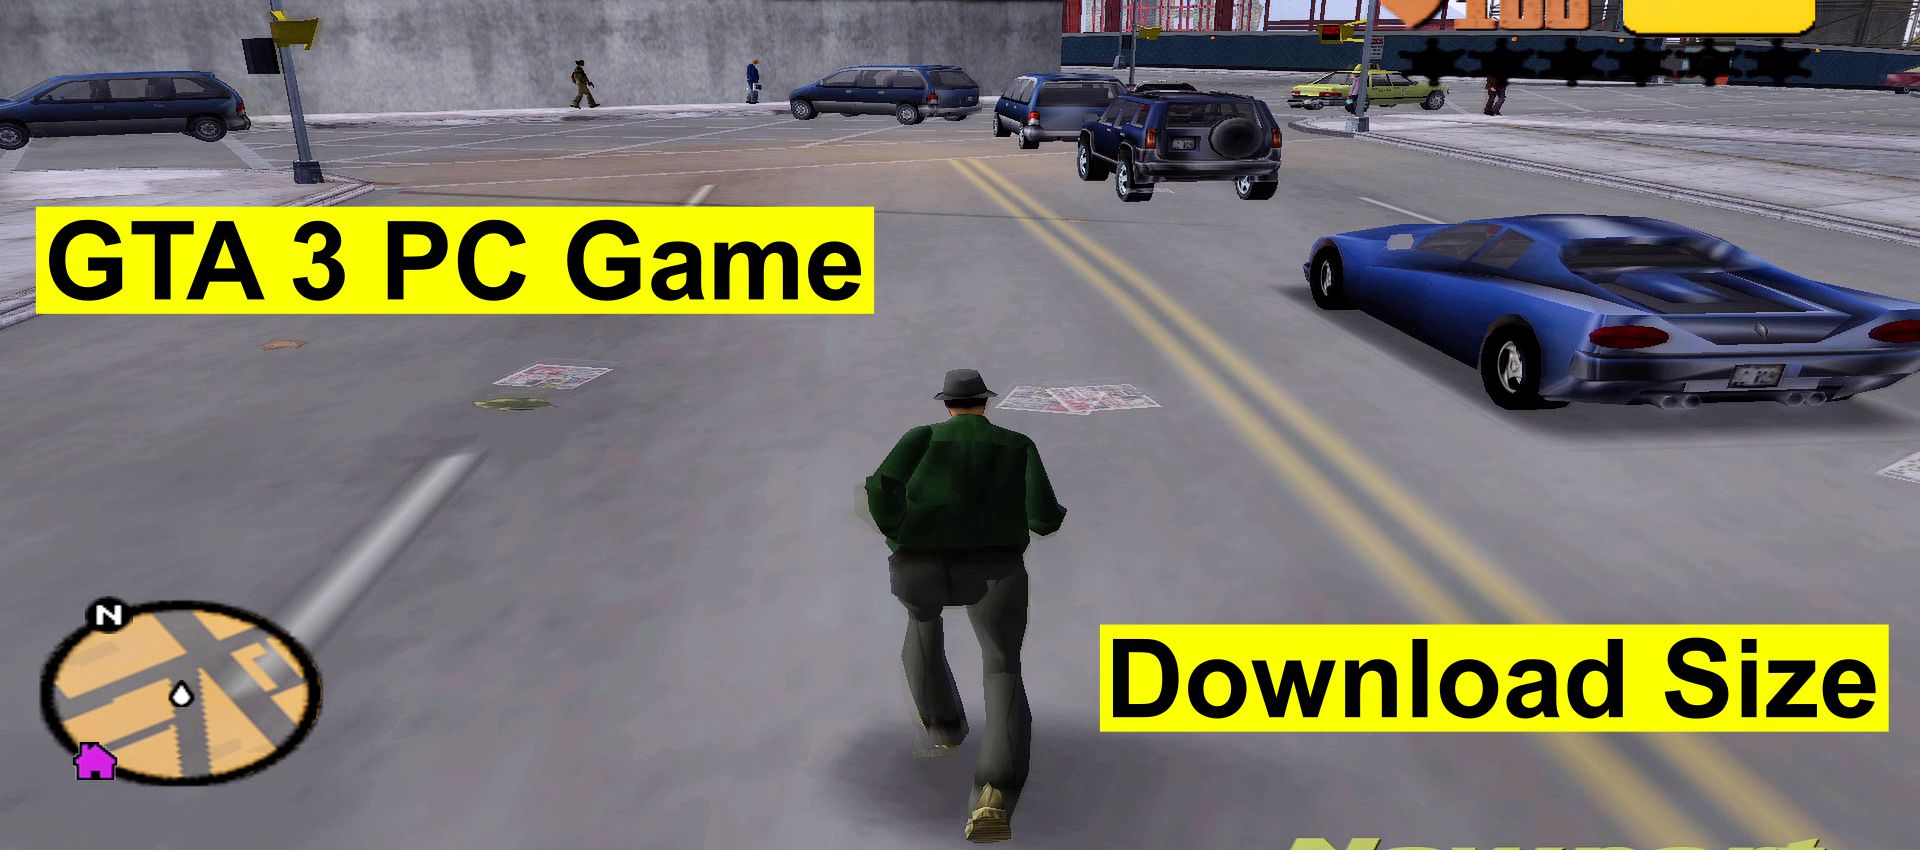 GTA 3 PC Game download size